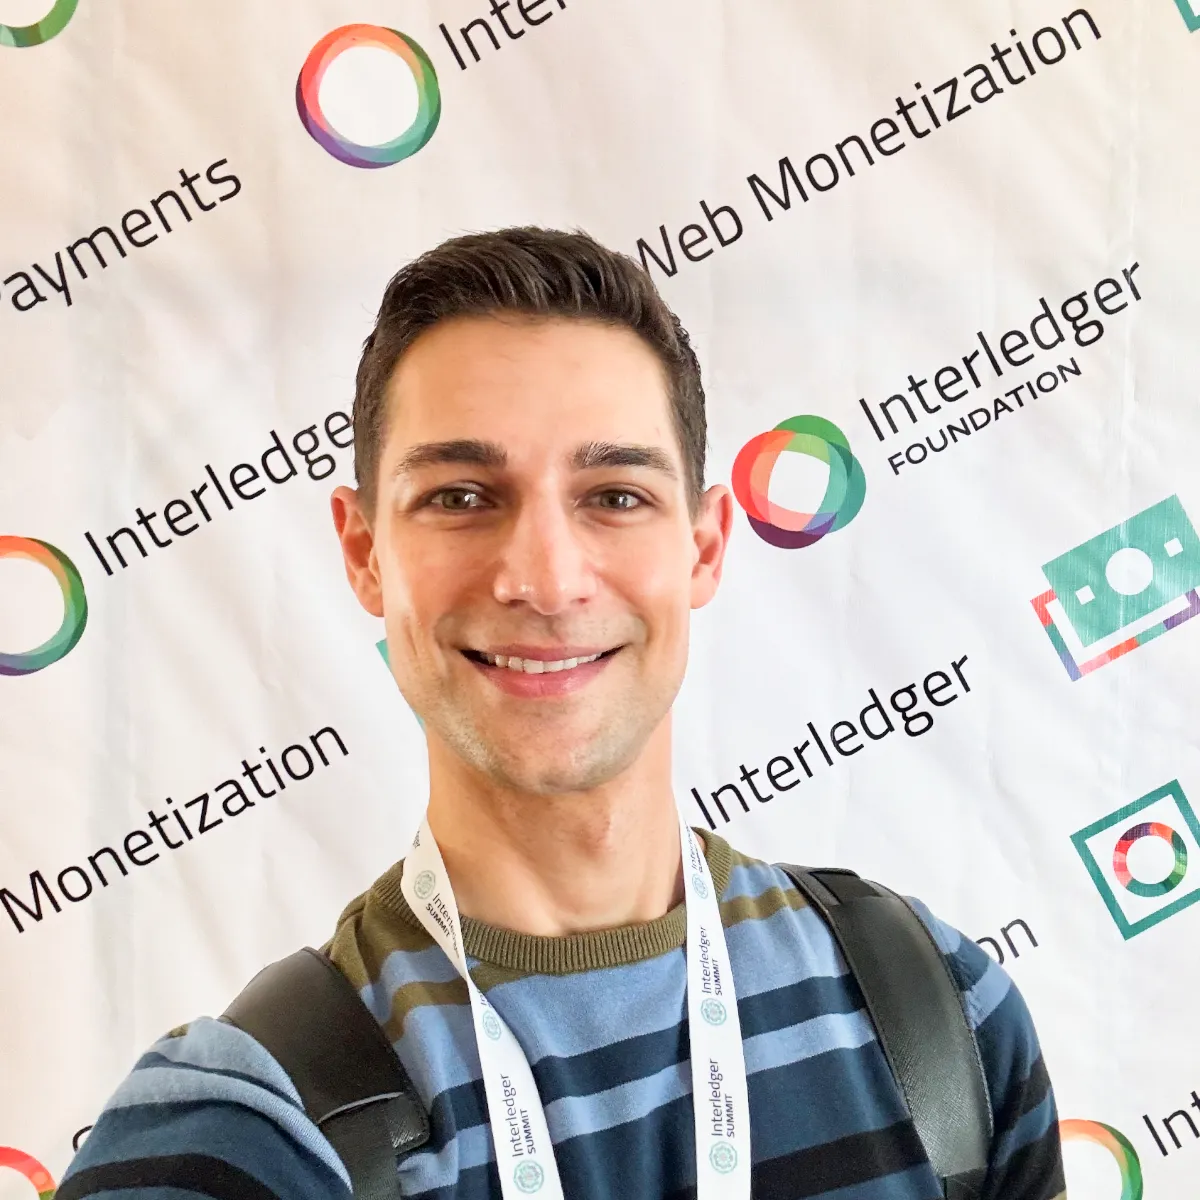 Jeremiah standing in front of step-and-repeat wall with logos of Interledger Foundation, Web Monetization, and Open Payments logos